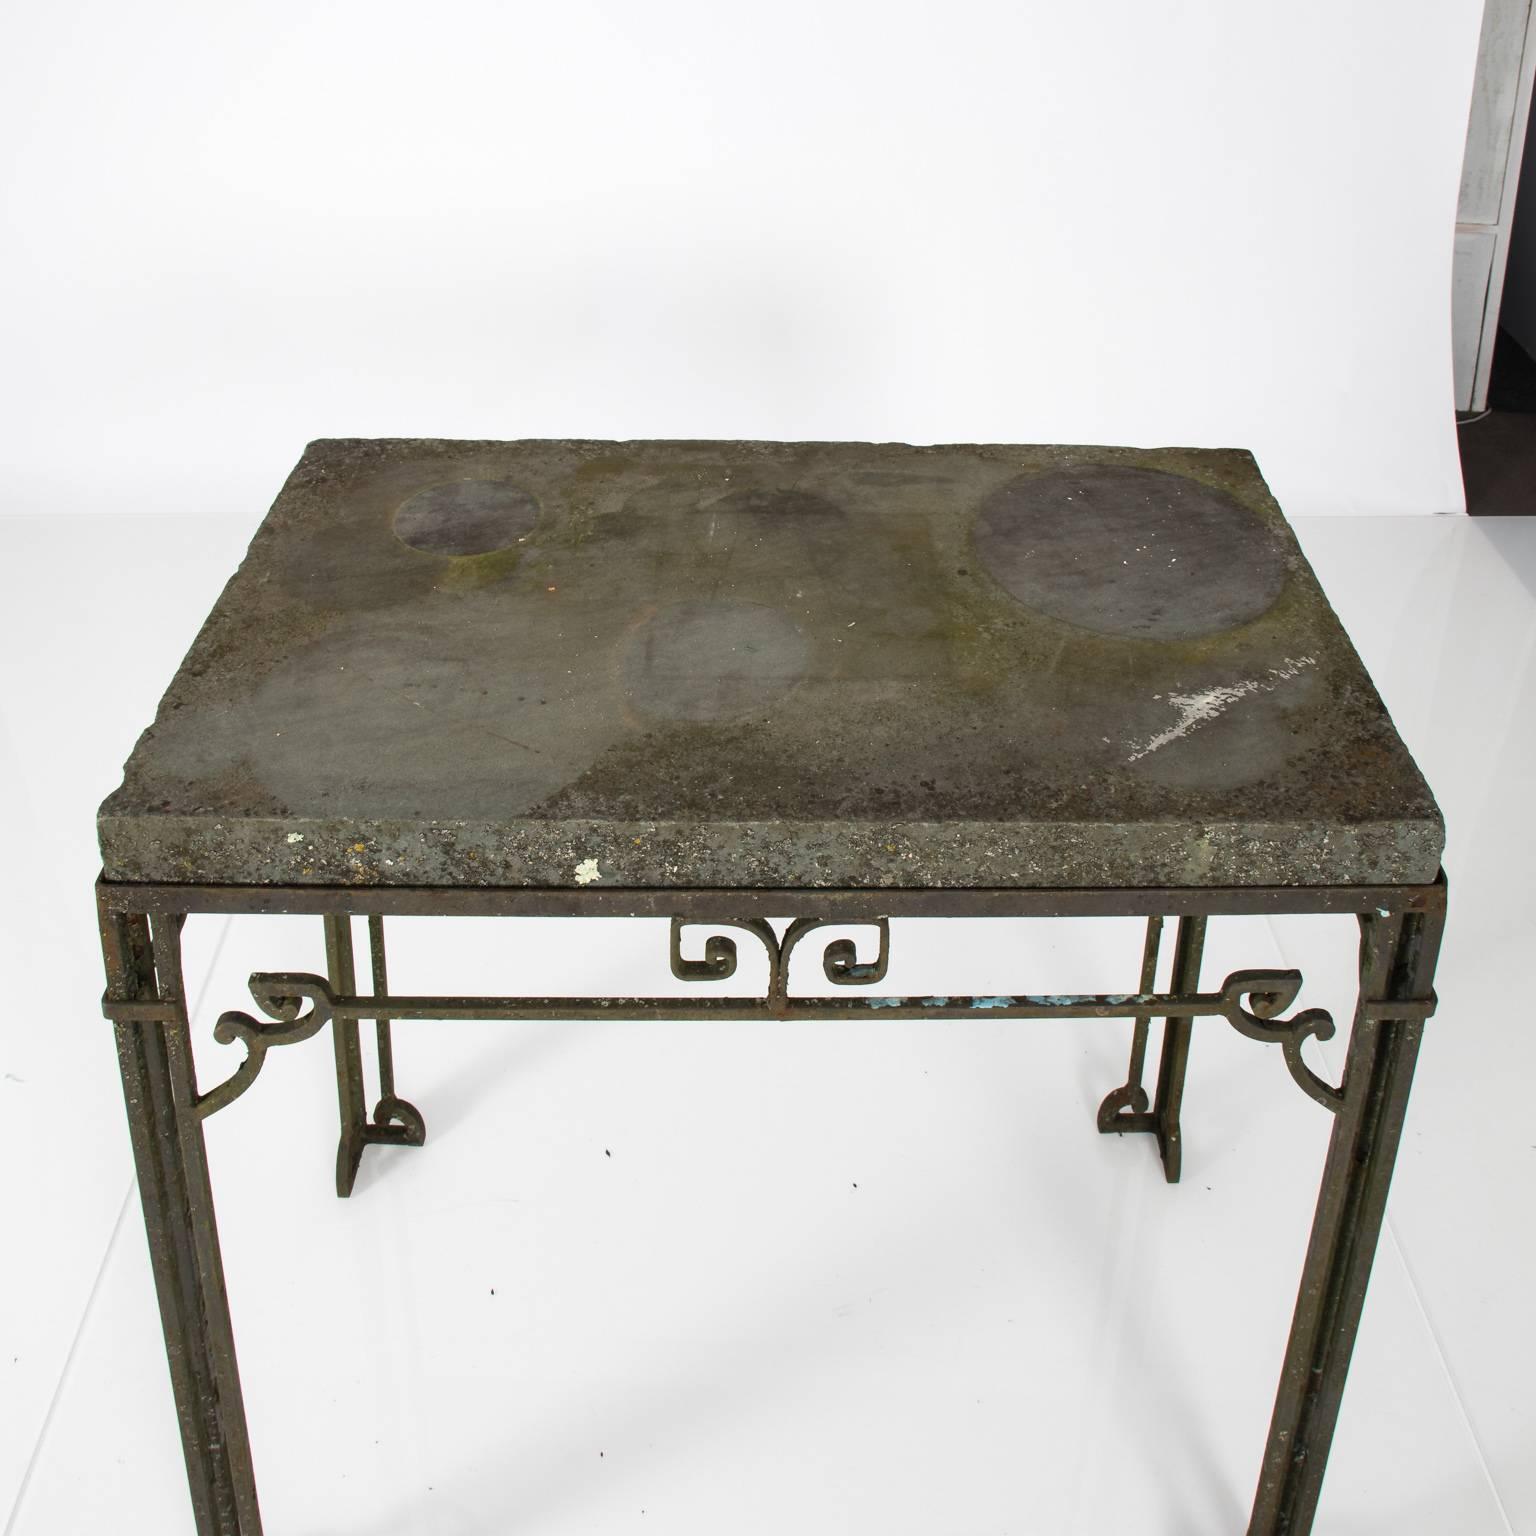 Contemporary iron base garden table with a slate top in a weathered finish.
 